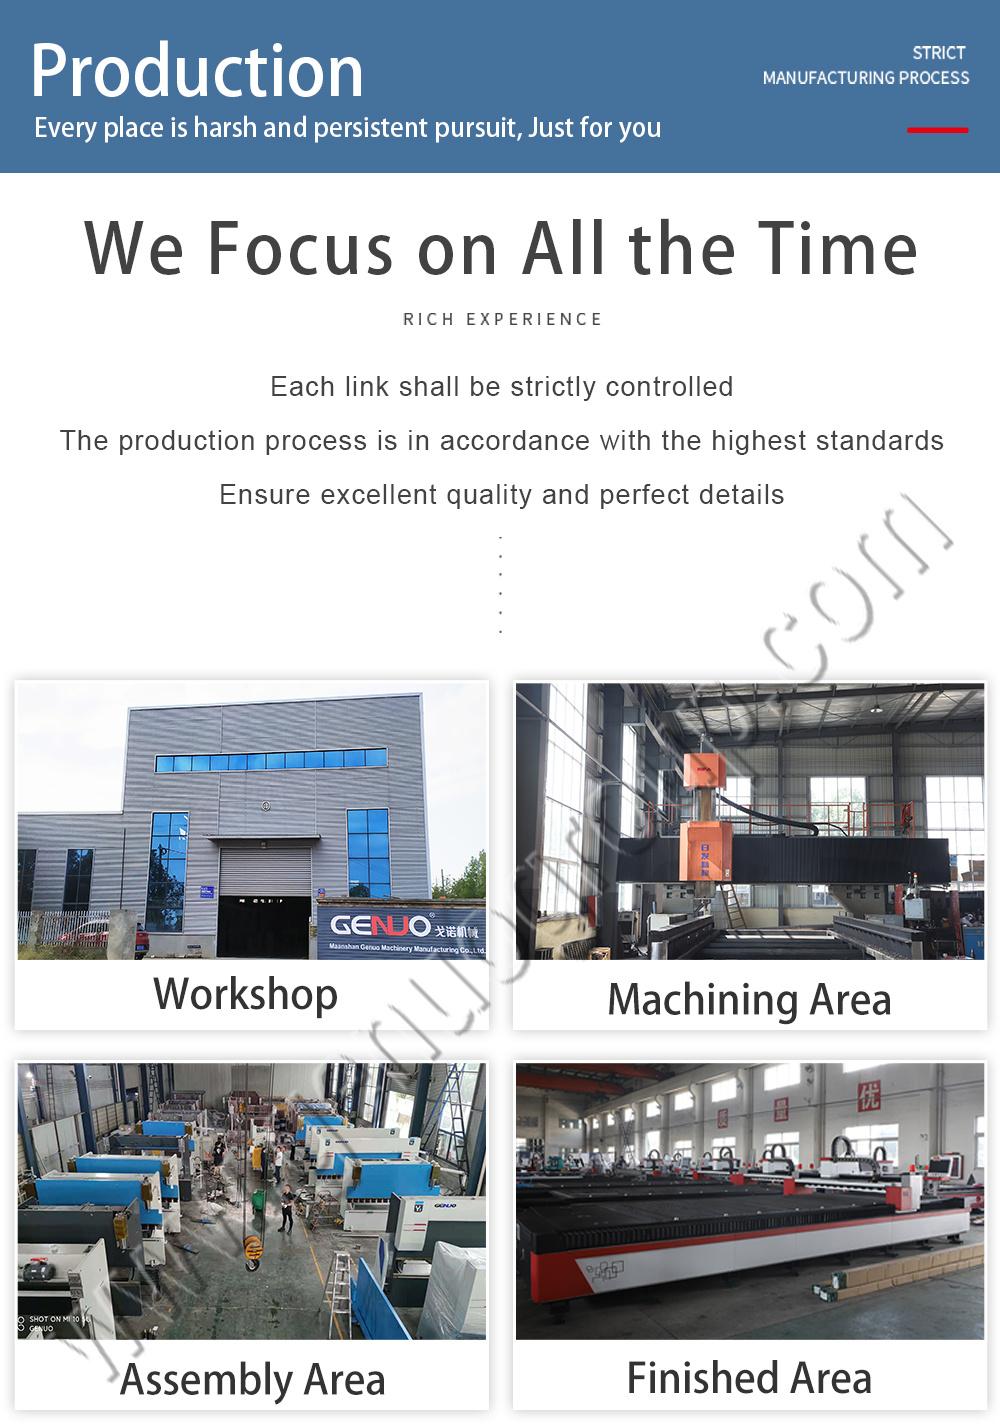 High Quality and Low Price Hydraulic Press Brake